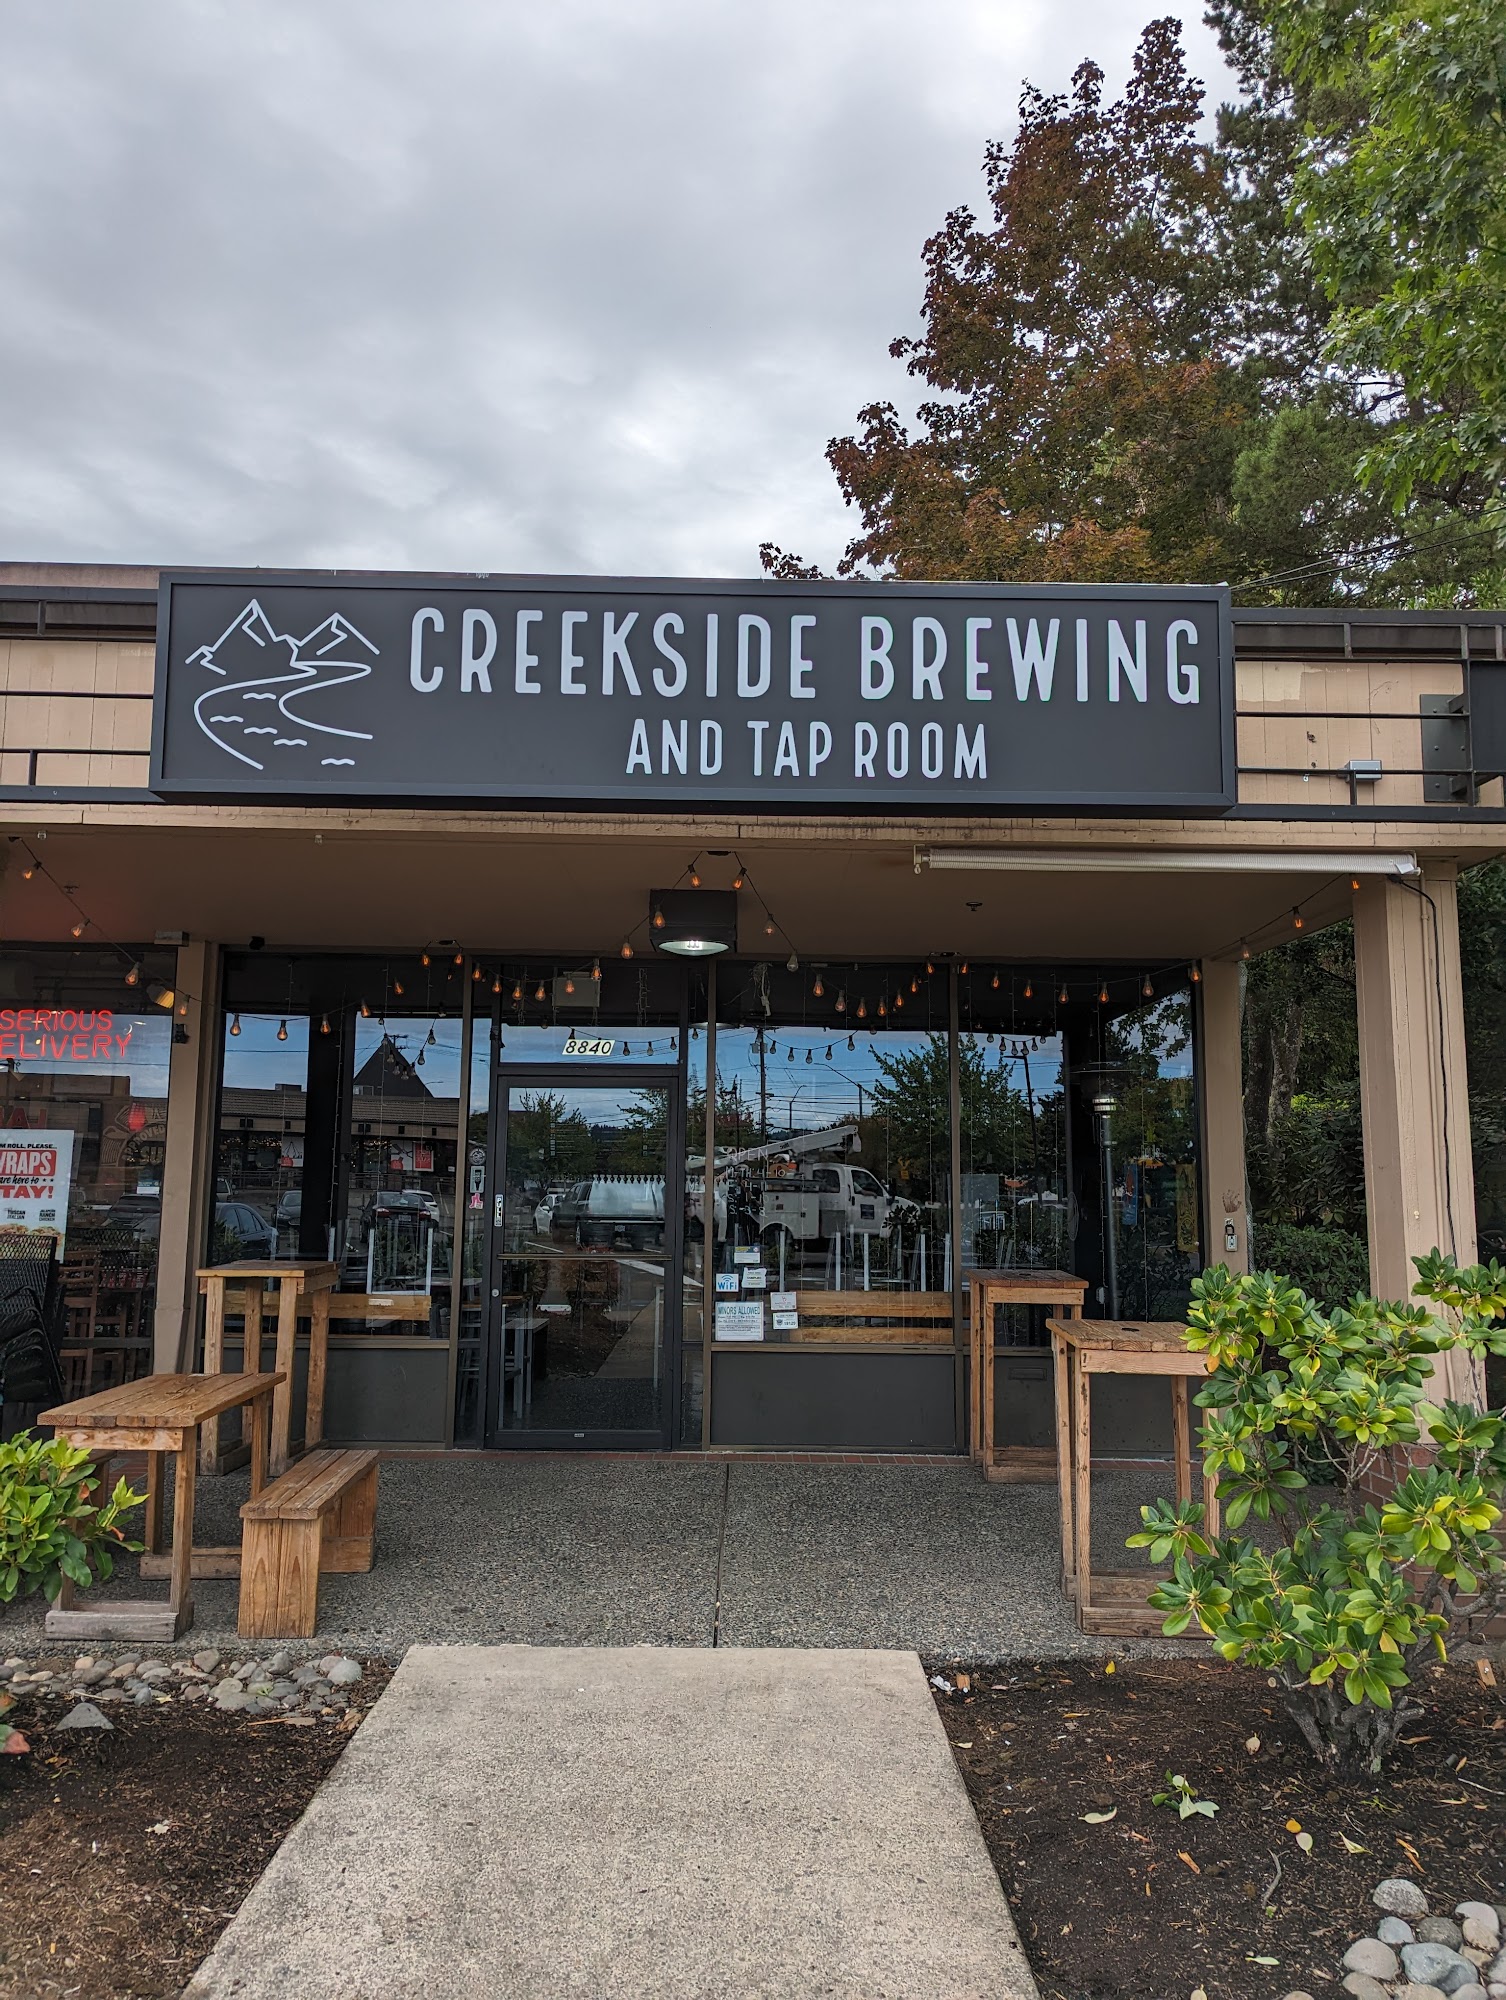 Creekside Brewing and Tap Room